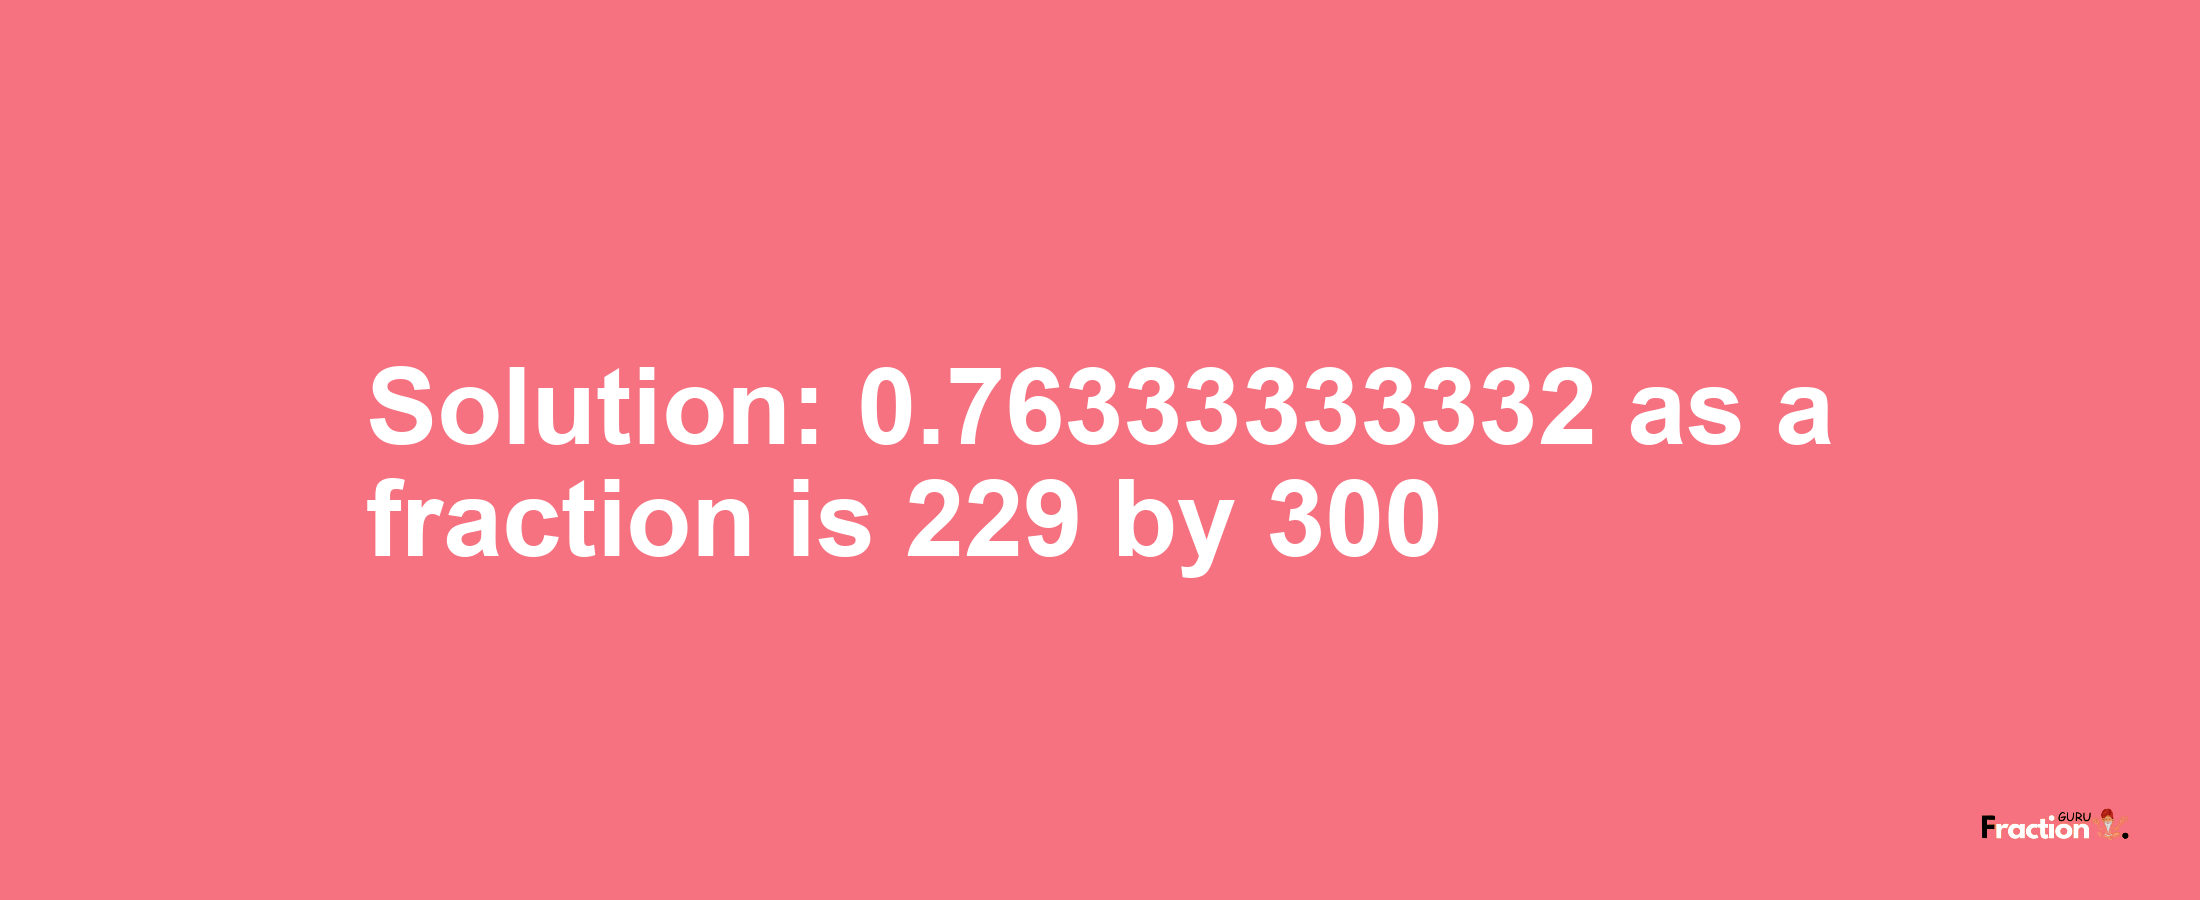 Solution:0.76333333332 as a fraction is 229/300